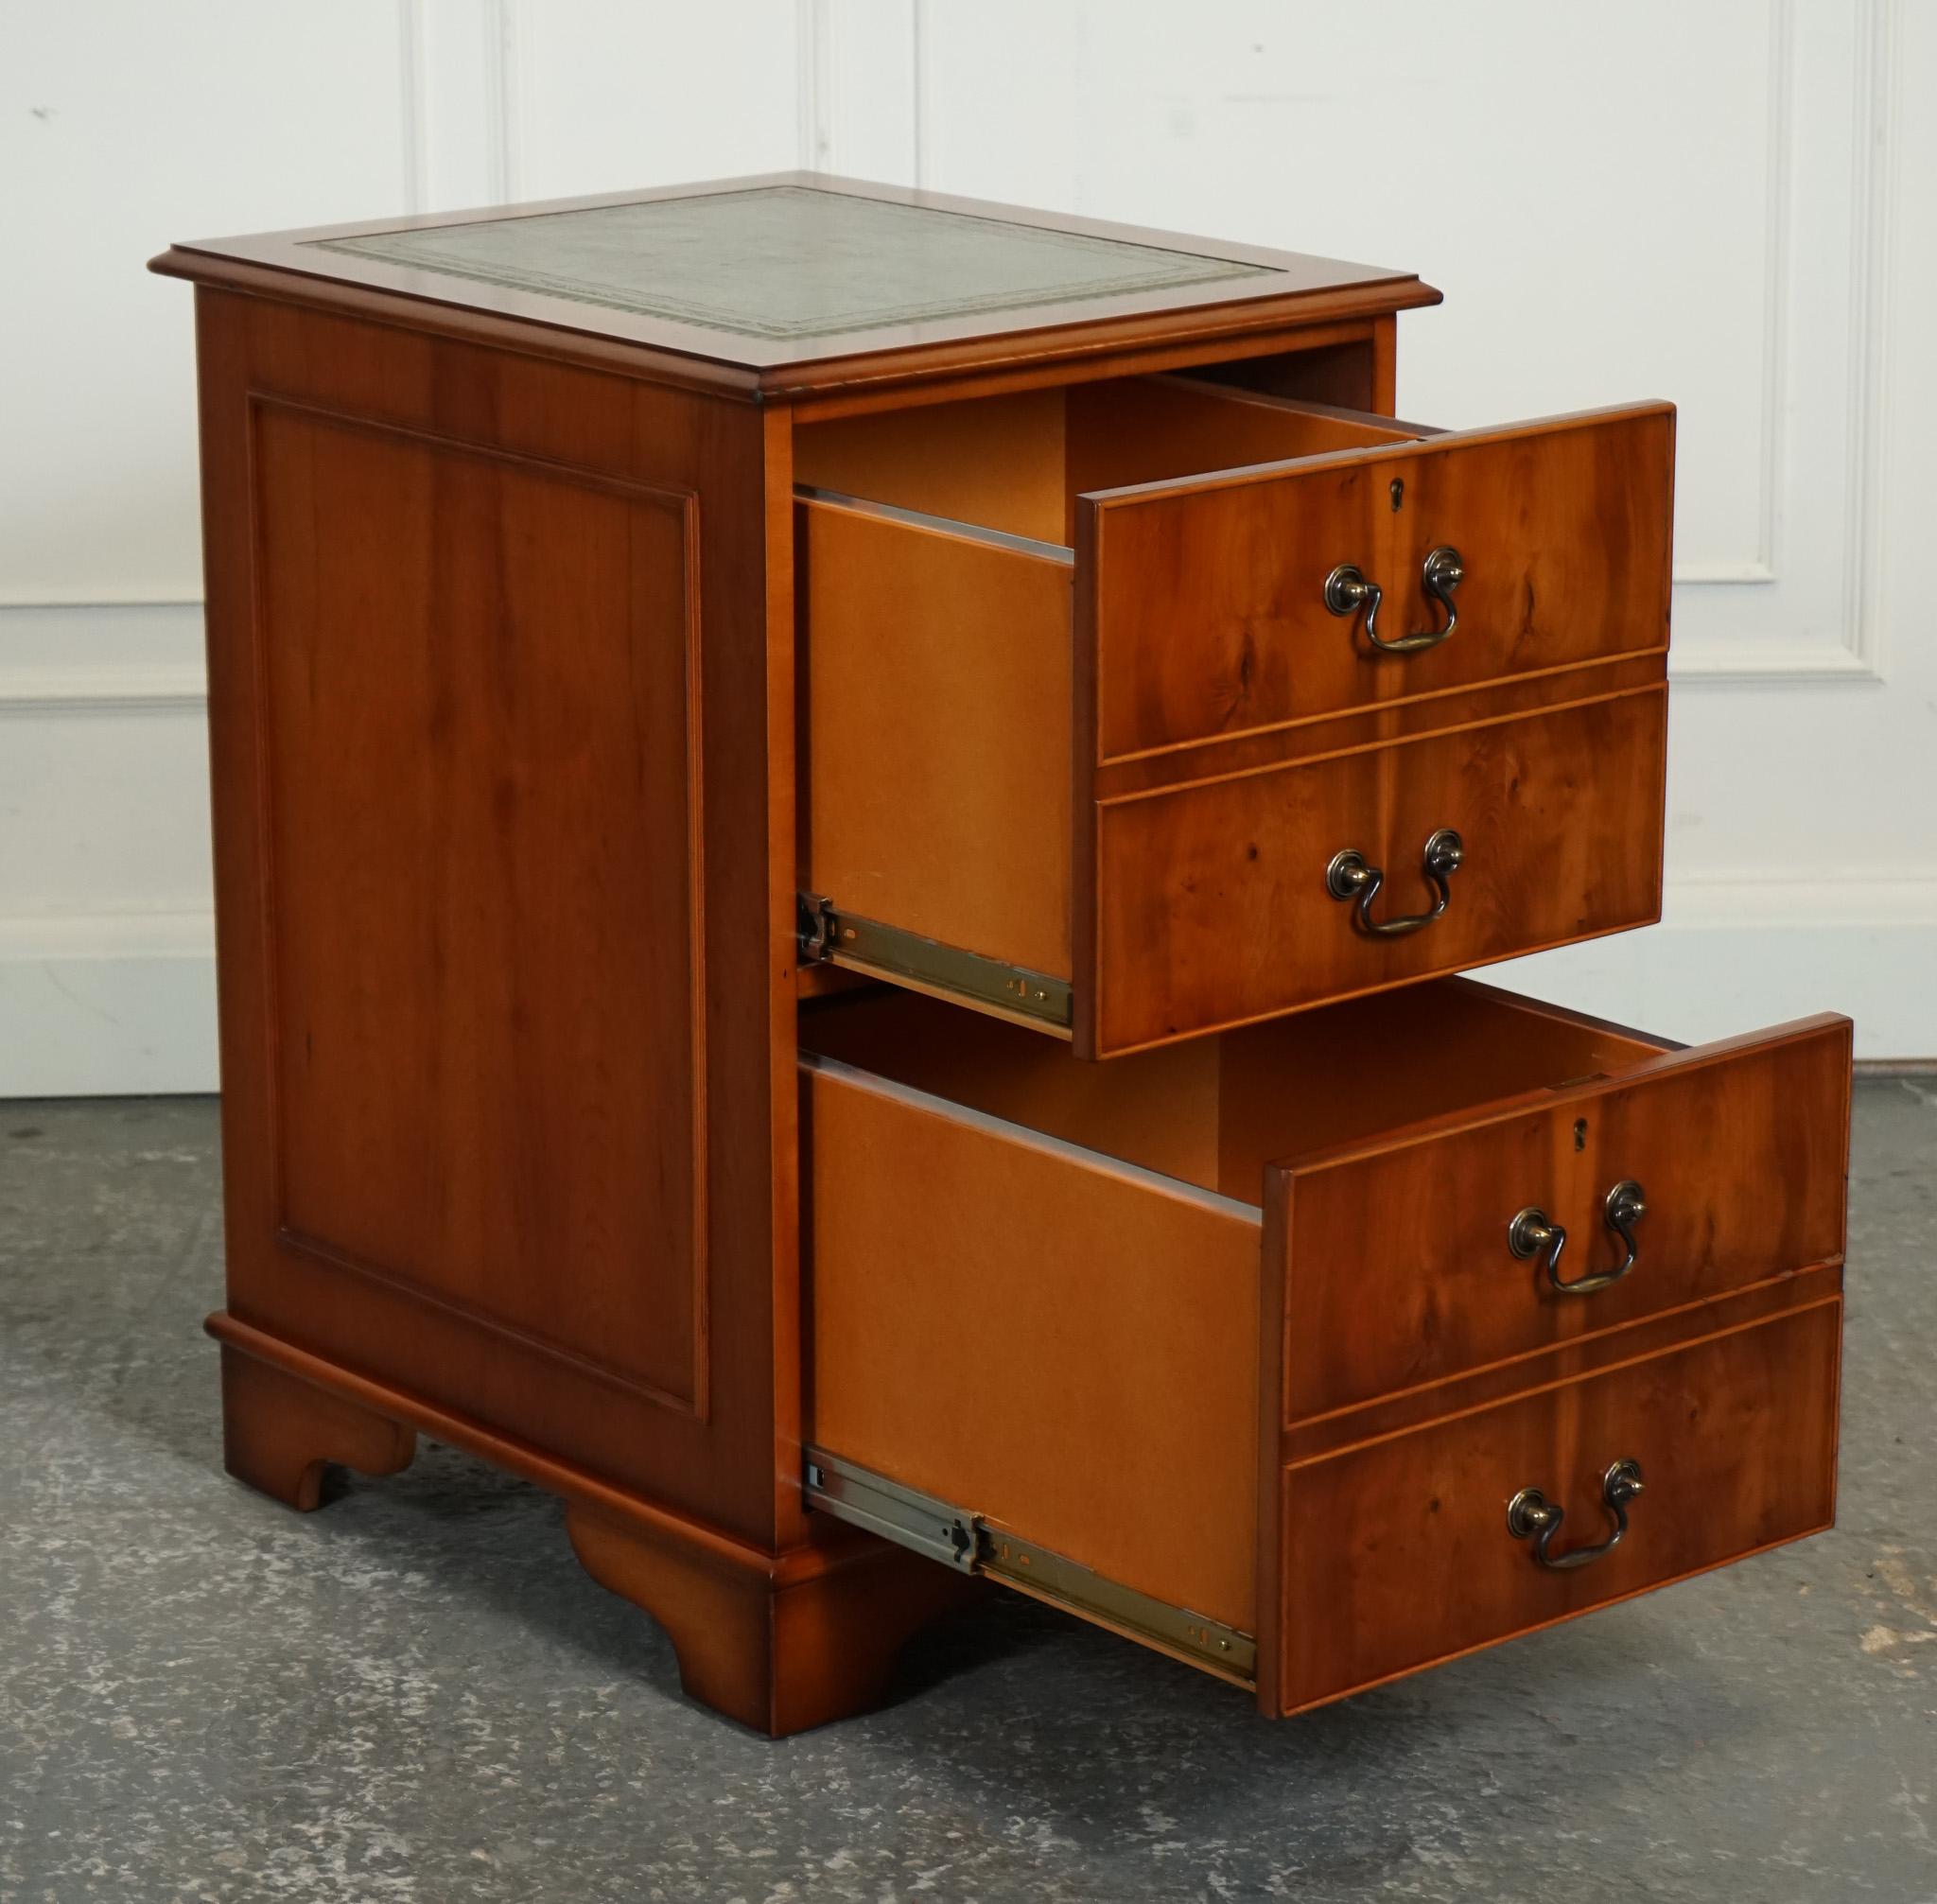 
We are delighted to offer for sale this Lovely Yew Wood Green Leather Top Filing Cabinet.

Made by Brights of Nettlebed is a luxurious and exquisite piece of furniture that exudes elegance and sophistication. The cabinet is crafted from